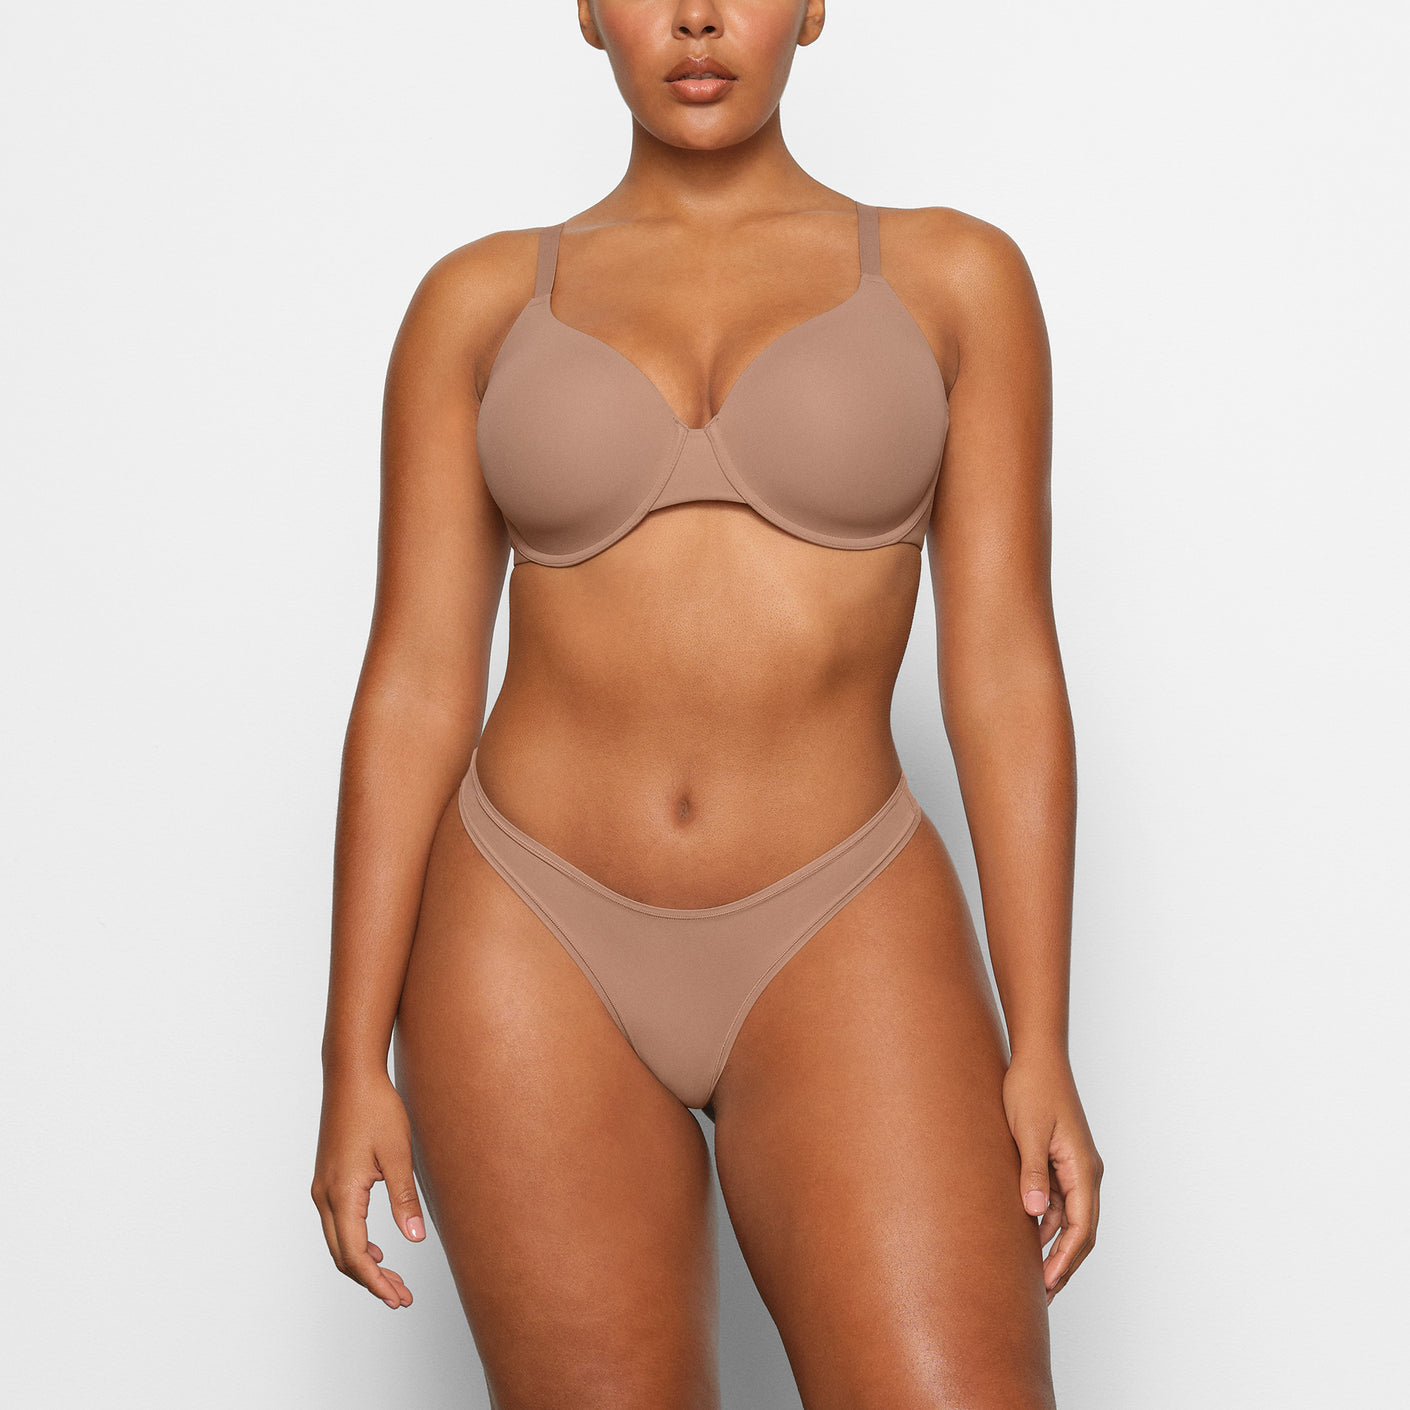 SKIMS Fits Everybody T-Shirt Bra in Sand Size 40DD NWT - $44 New With Tags  - From Julie